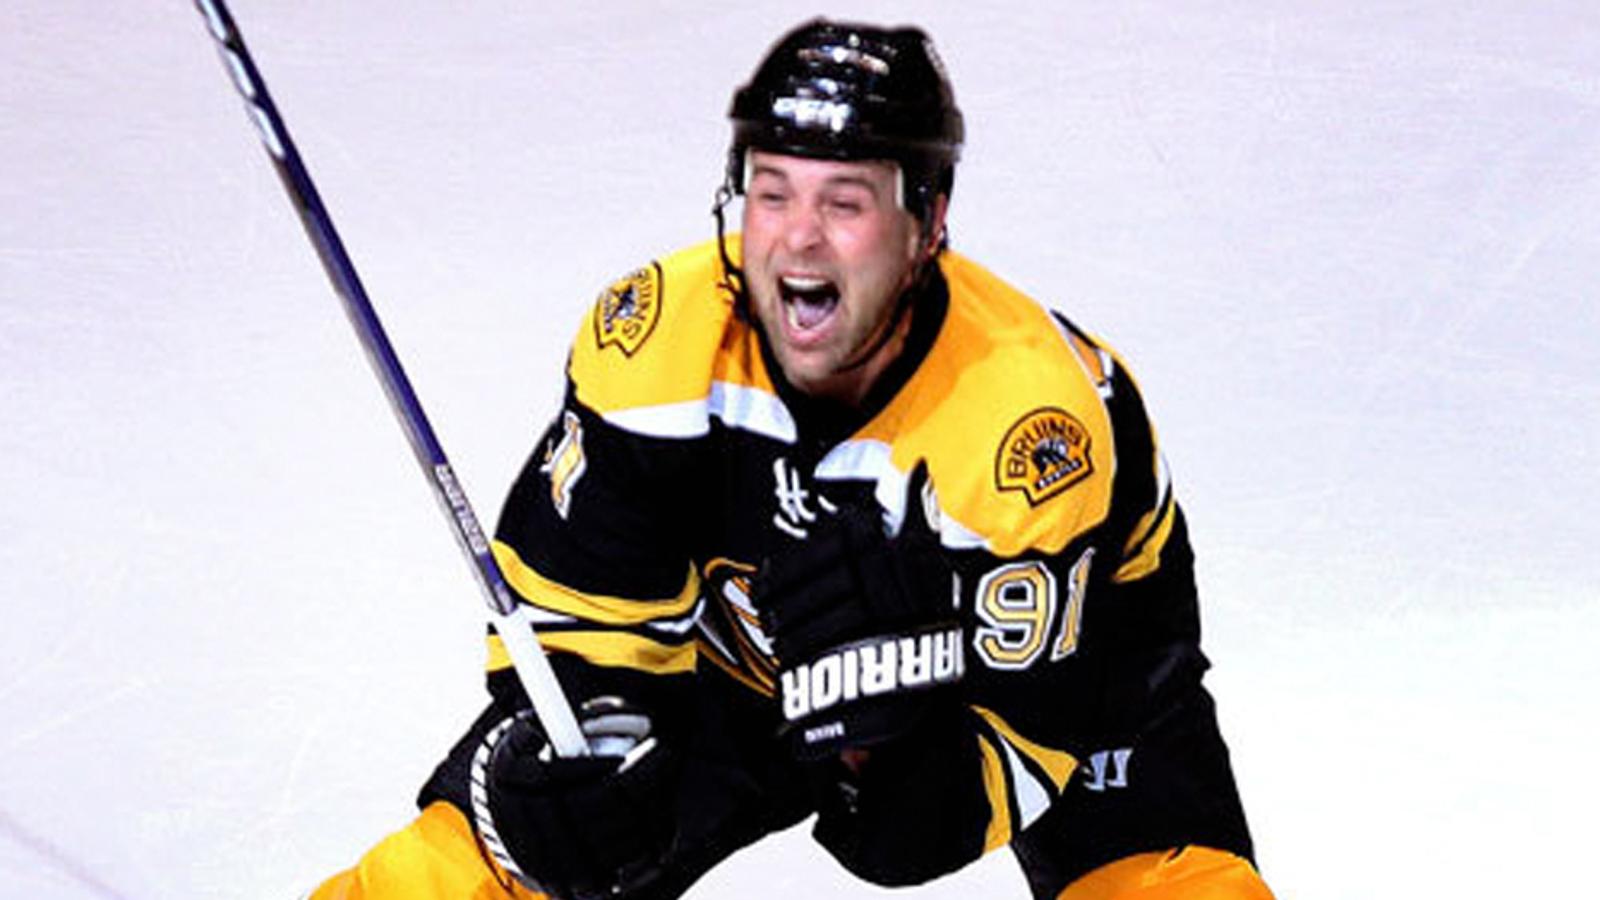 Former NHLer Marc Savard hired for head coaching role in OHL